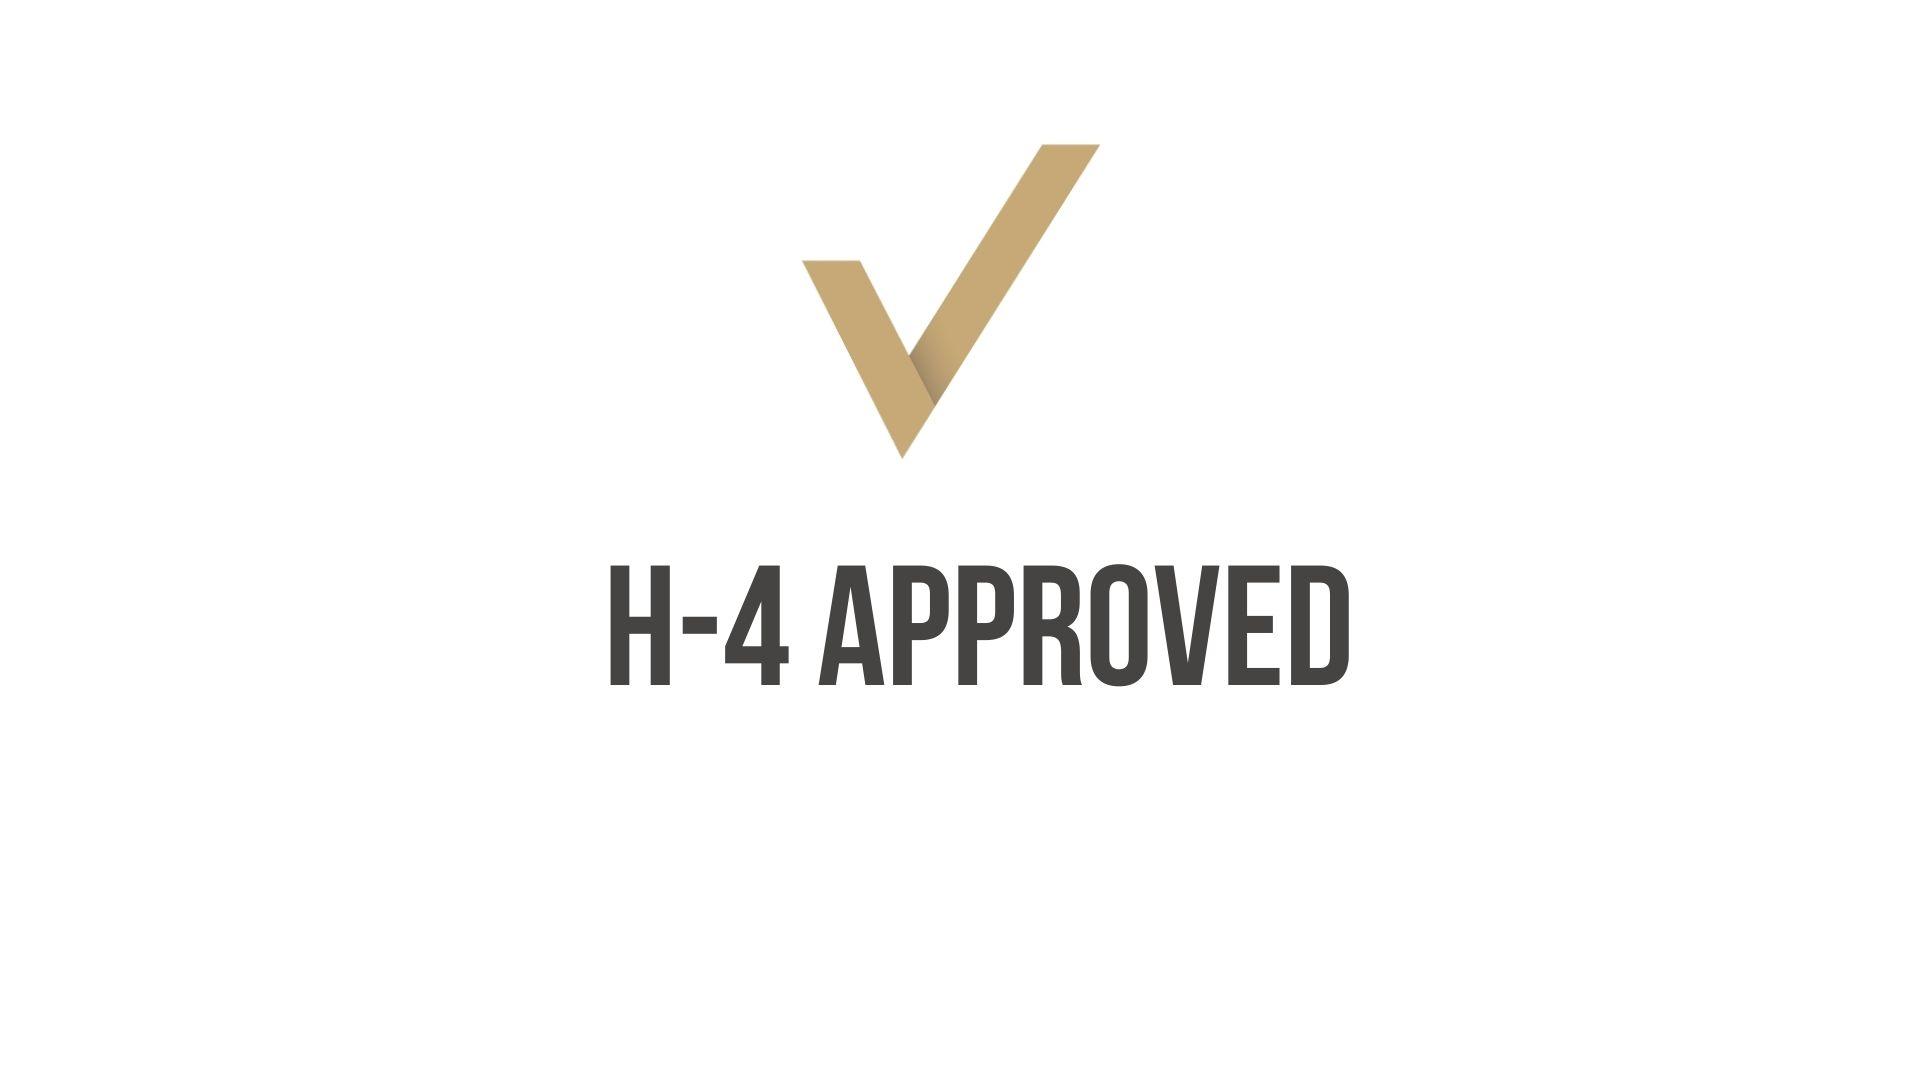 H-4 Approval for Child of H-1B Status Holder